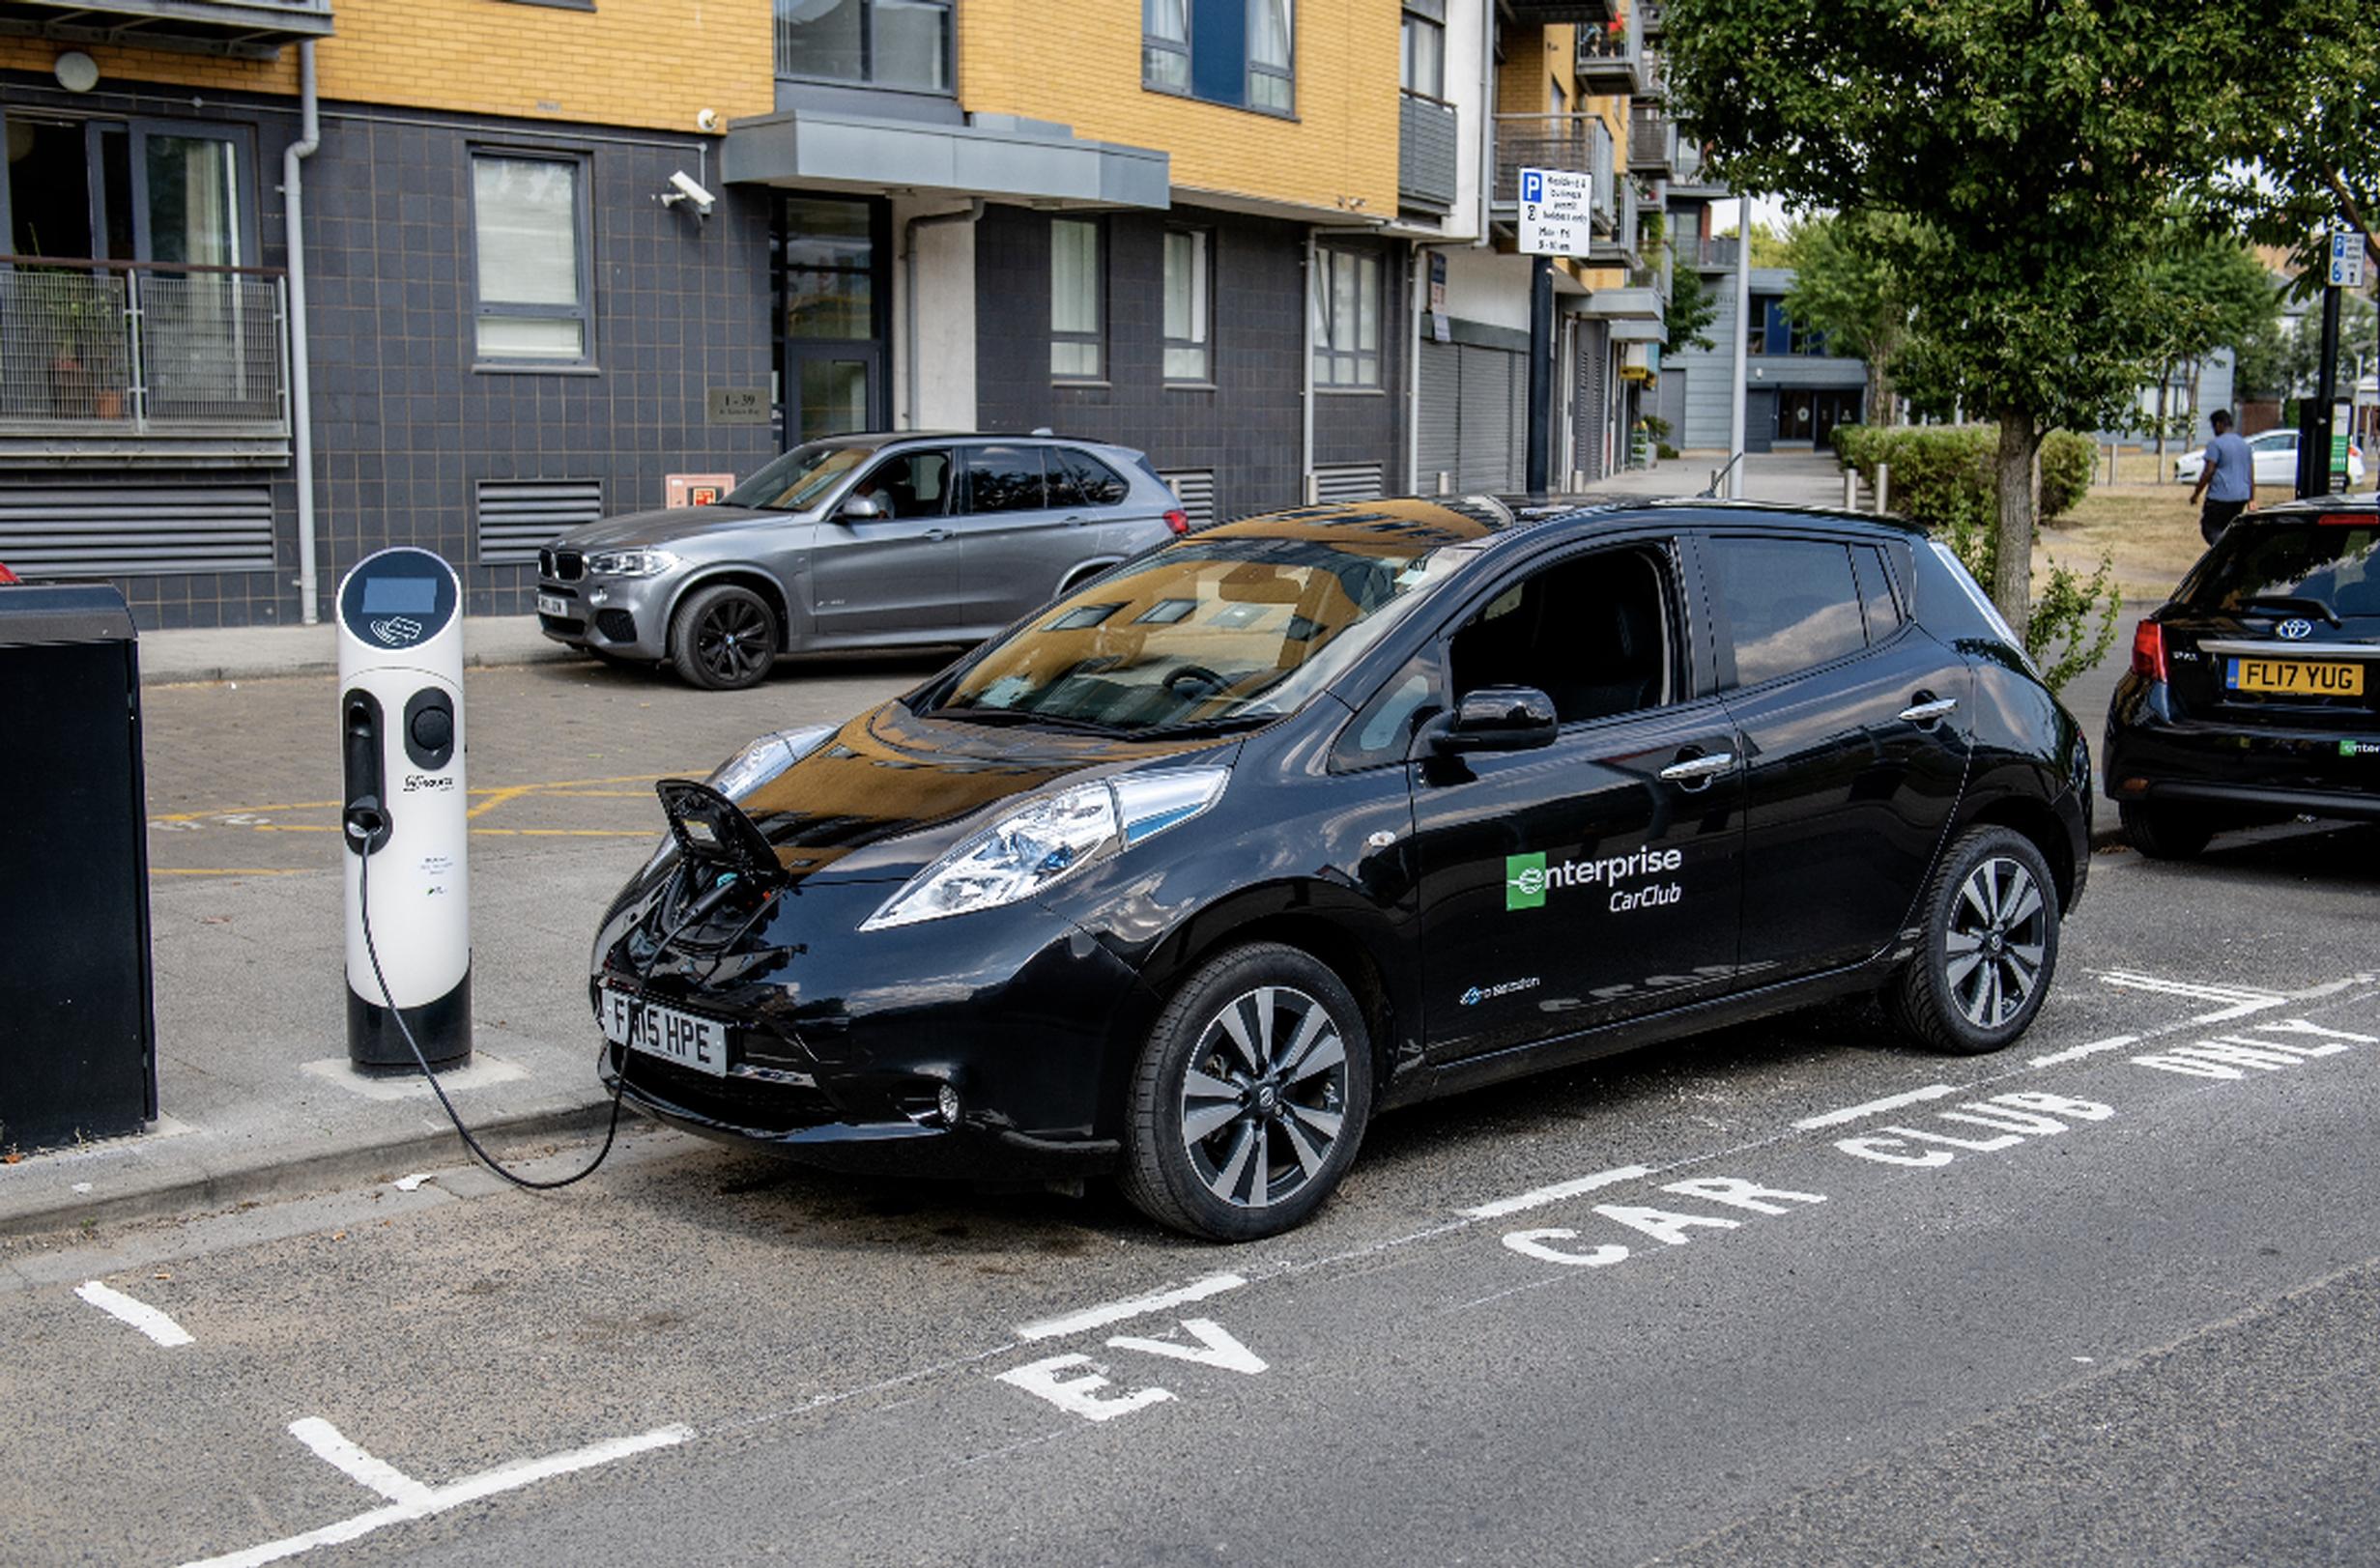 CoMoUK wants TfL to co-establish with London Councils and boroughs the basis of an electric vehicle charging infrastructure that suits the needs of car clubs and gives them preferential access